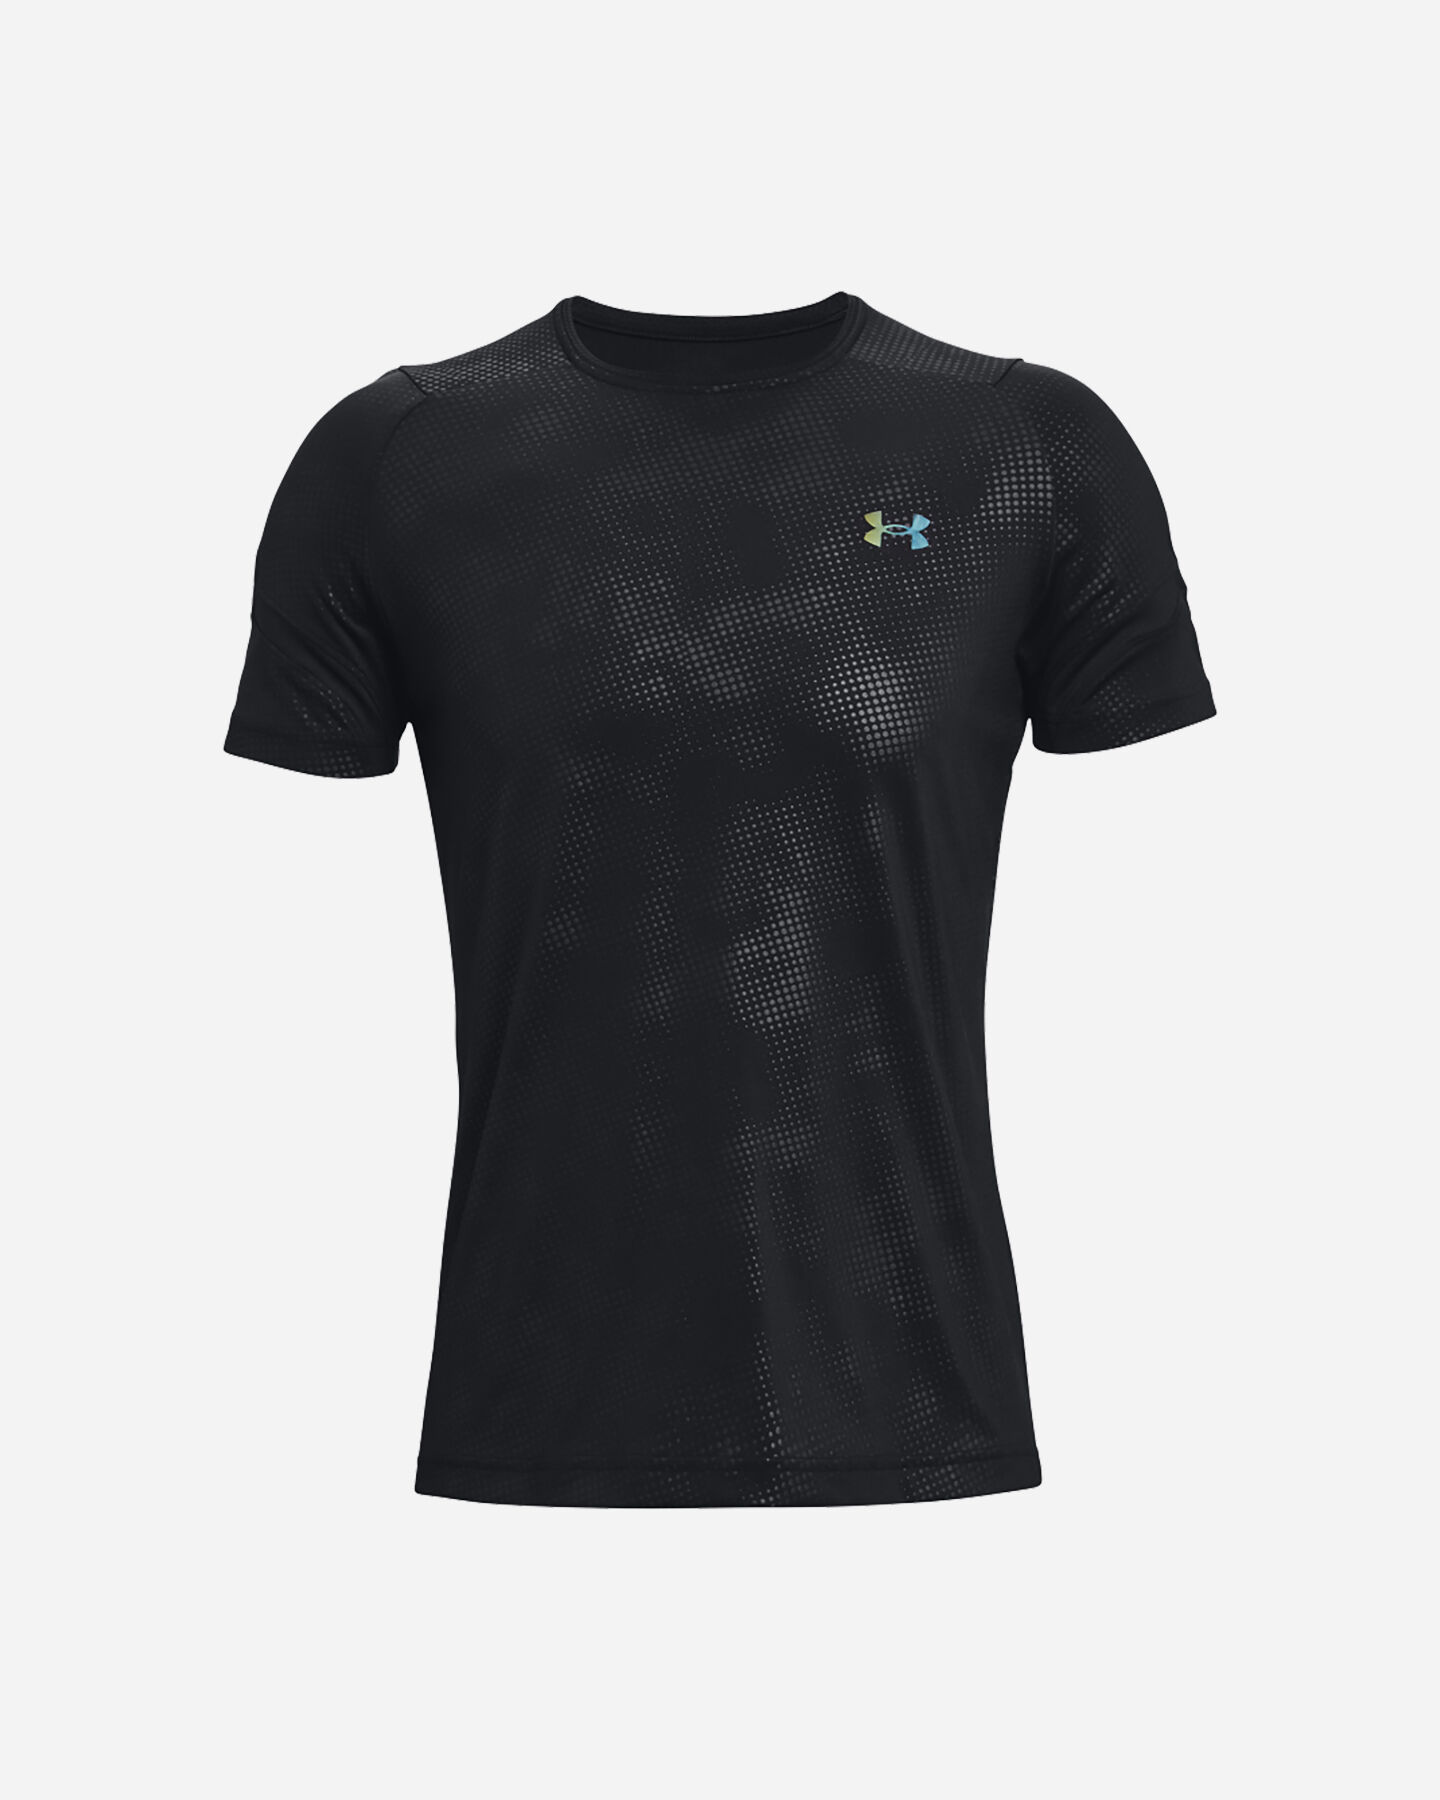  T-Shirt training UNDER ARMOUR RUSH EMBOSS M S5459196|0001|SM scatto 0